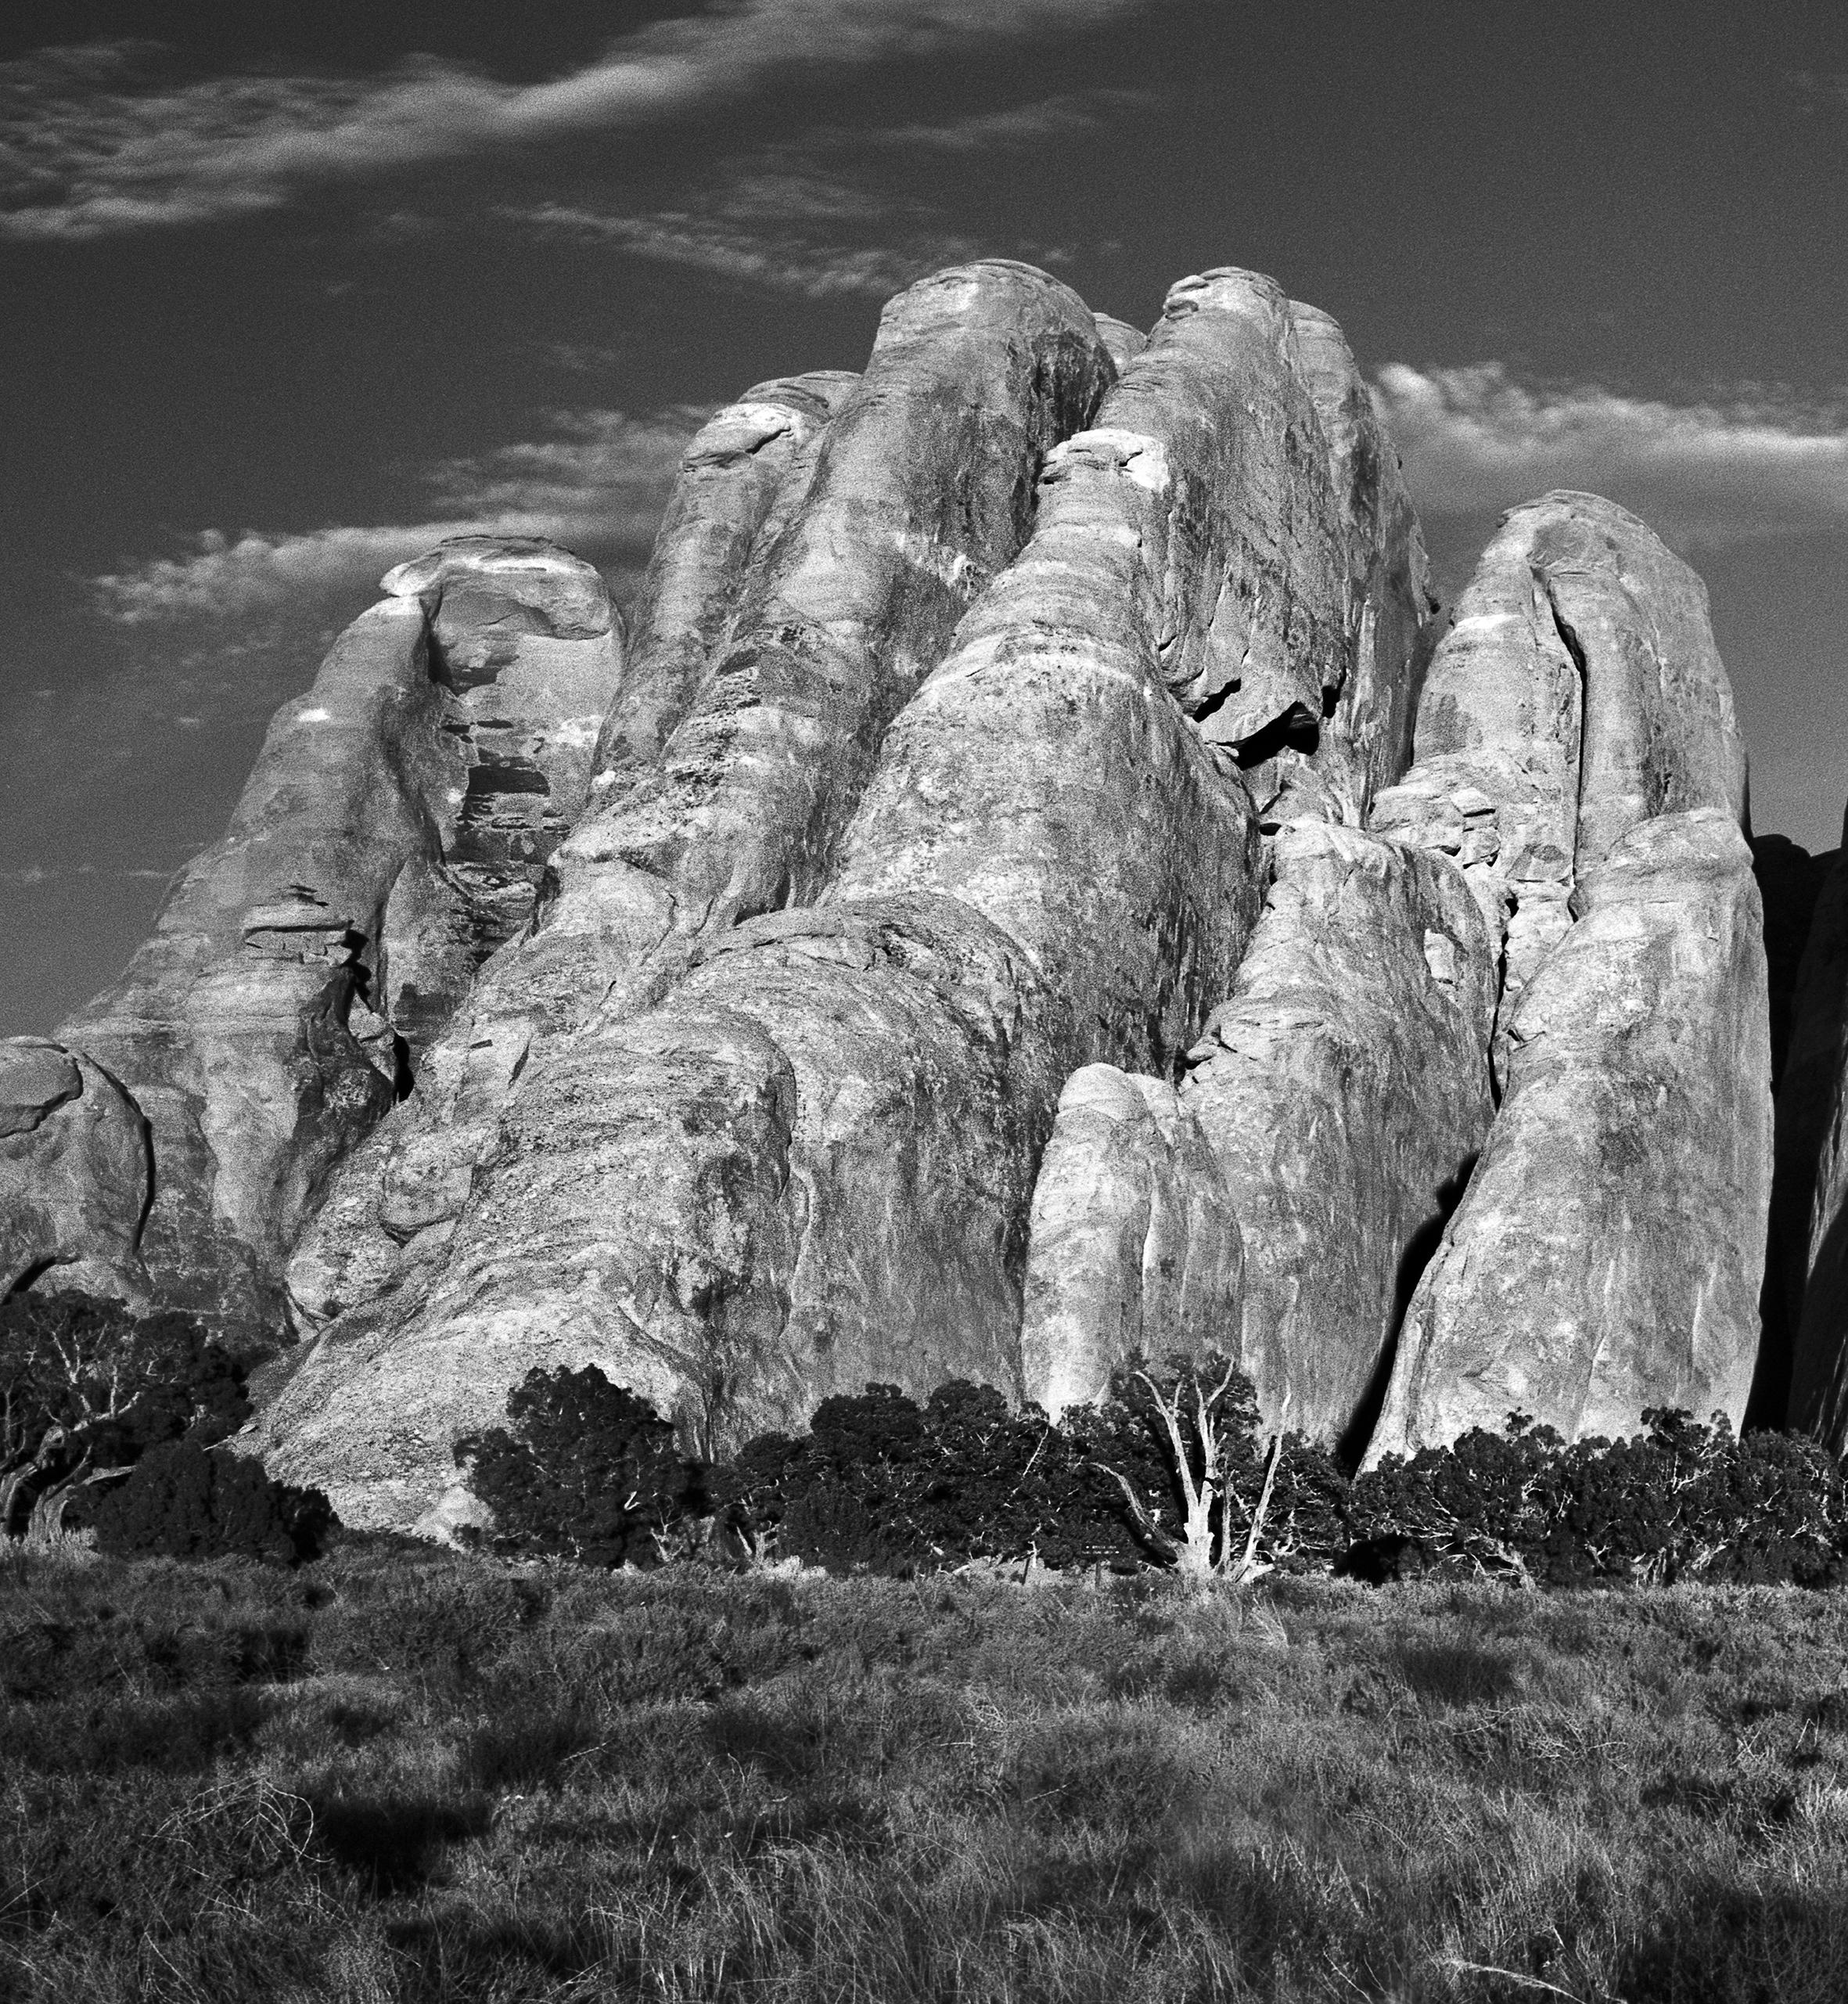 Sand Dune Arches #2- black and white rock arch photography, limitd edition of 20 - Photograph by Ugne Pouwell